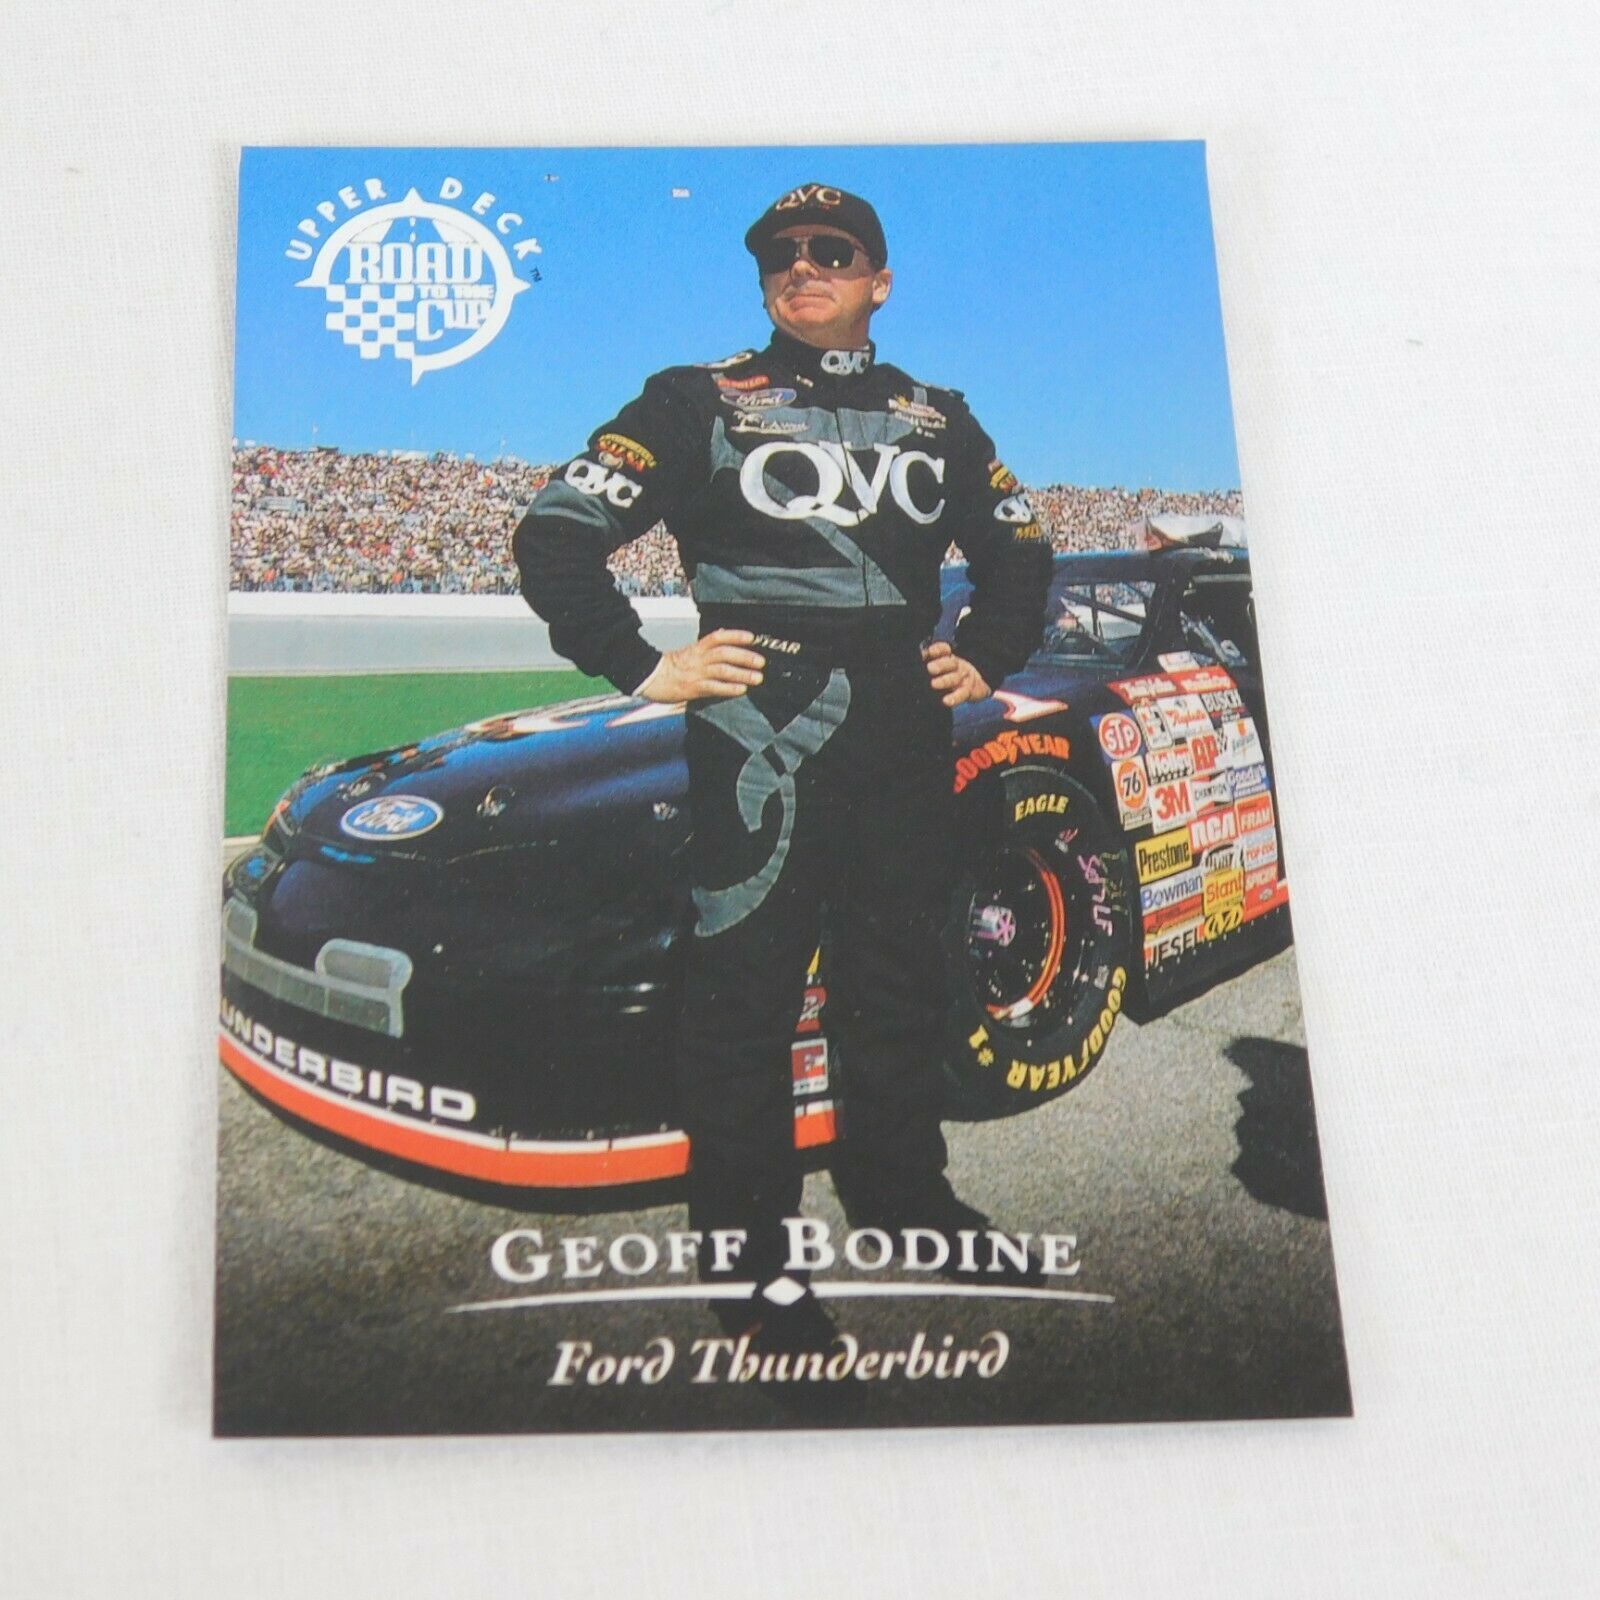 Primary image for 1996 Upper Deck Road To The Cup Card Geoff Bodine RC15 VTG Hologram Collectible